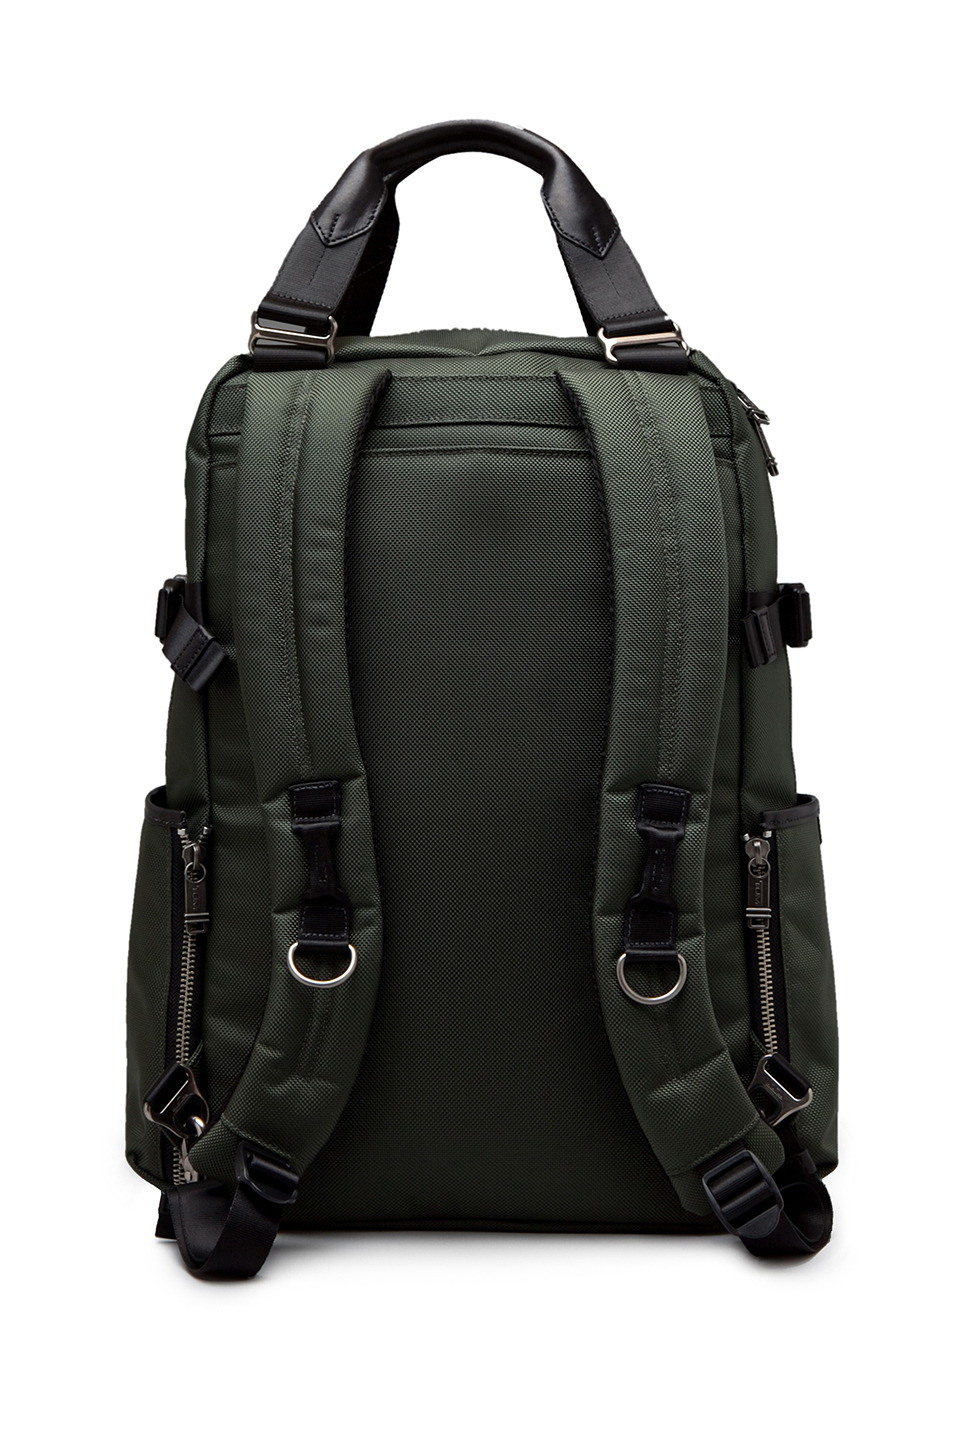 Lyst - Tumi Alpha Bravo Lejeune Backpack Tote in Green